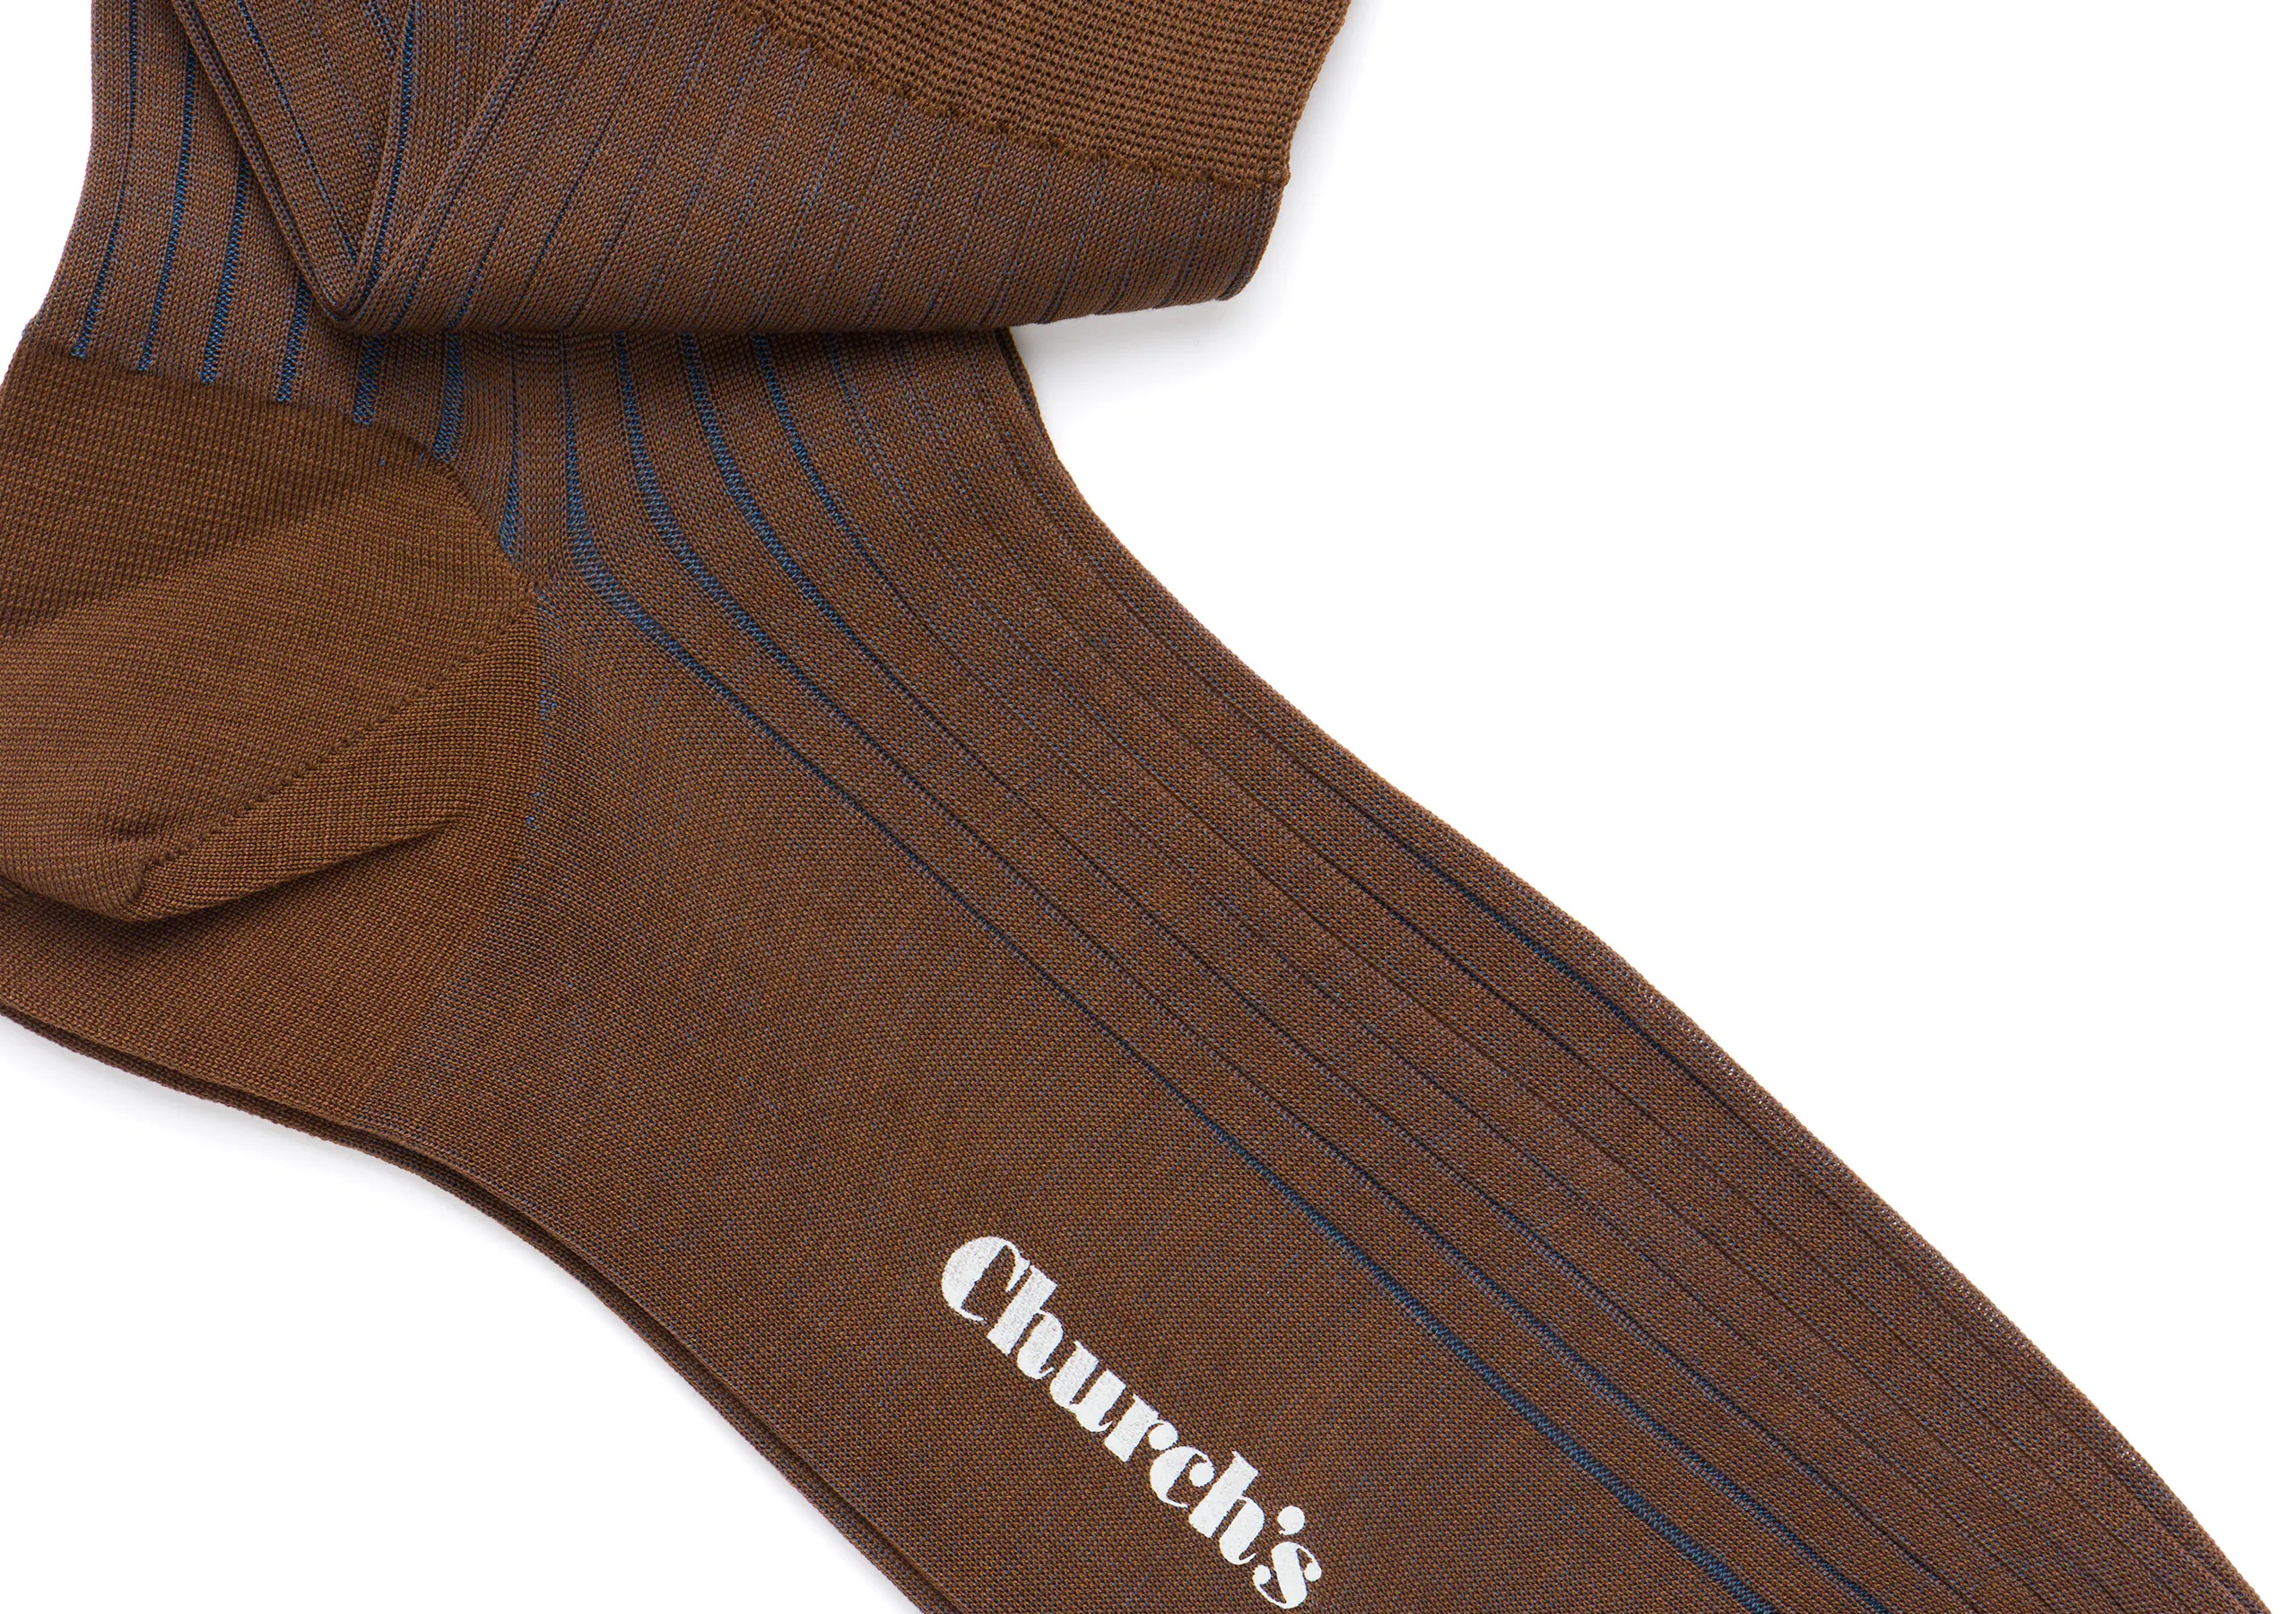 Contrast ribbed socks
Cotton Ribbed Short Brown - 2